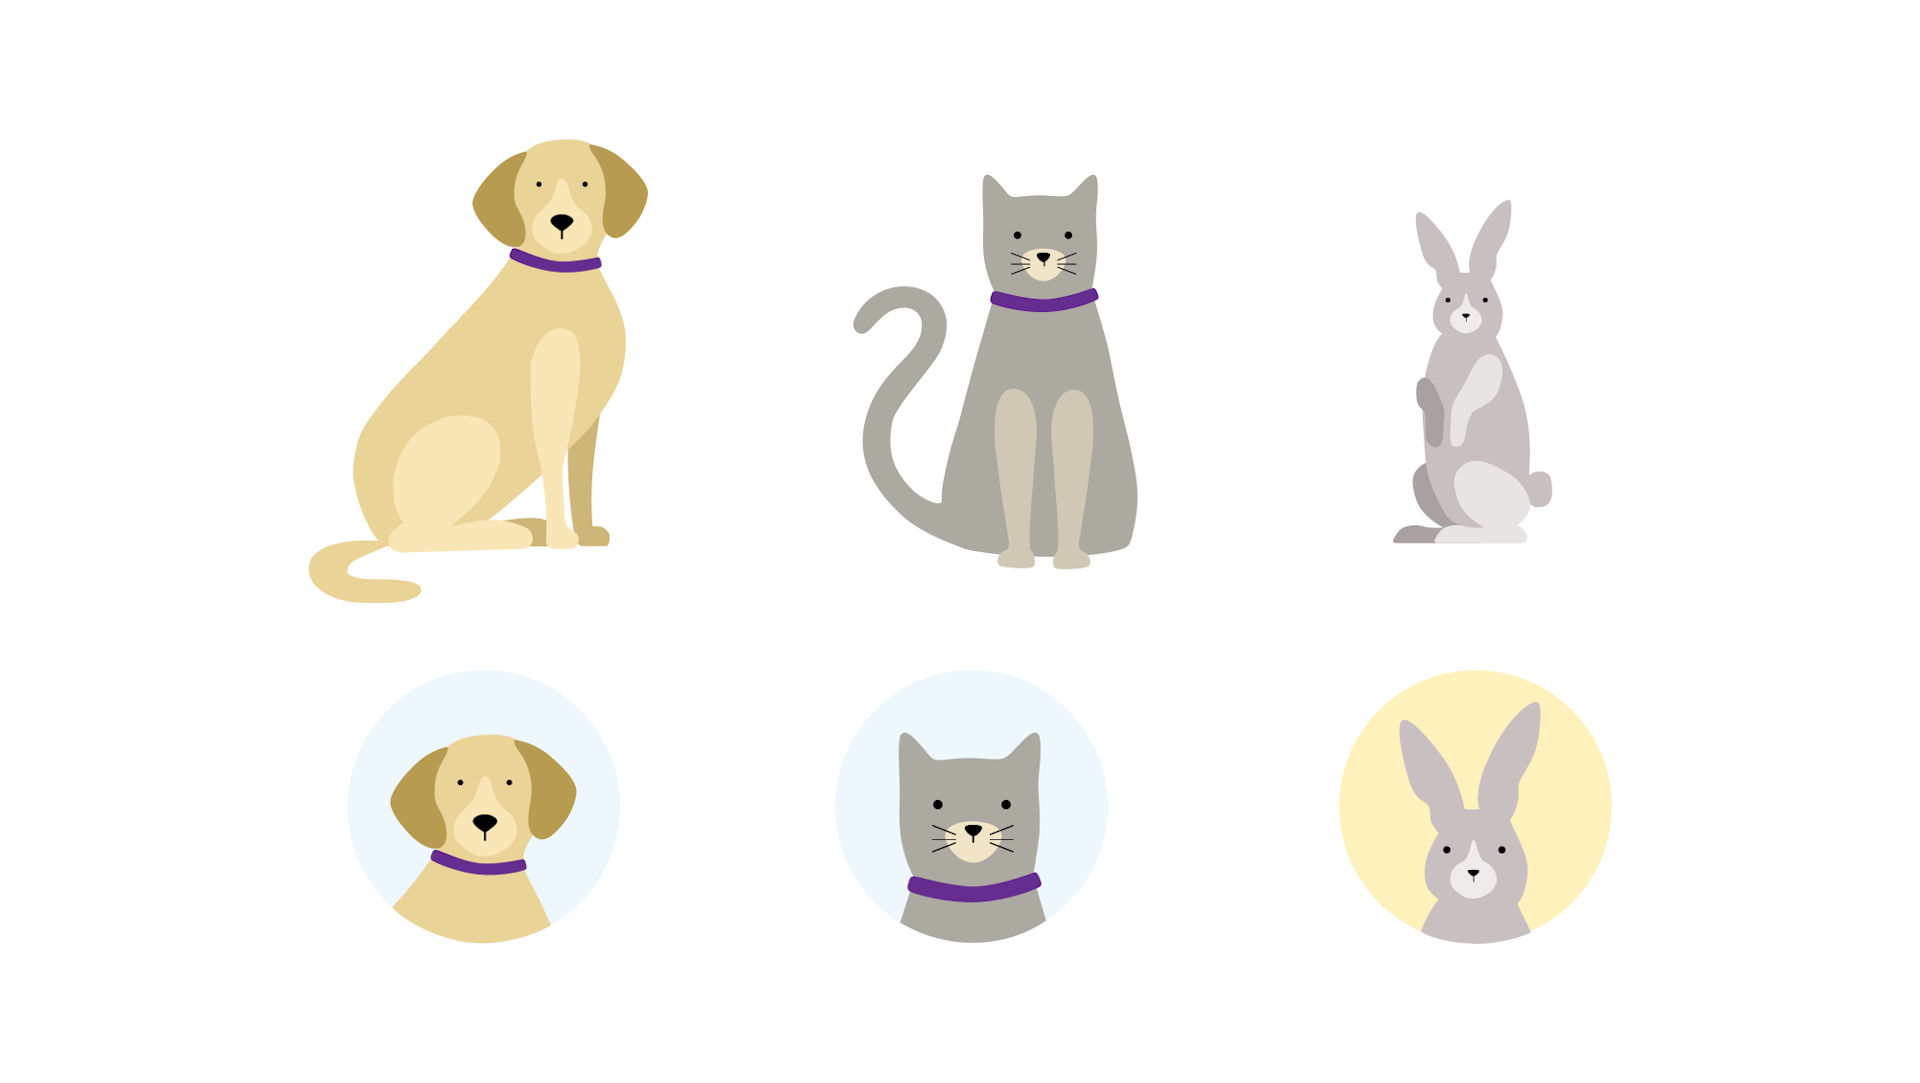 Illustrations of a dog, cat and rabbit, with the row below showing their faces framed on blue and yellow circular backgrounds.